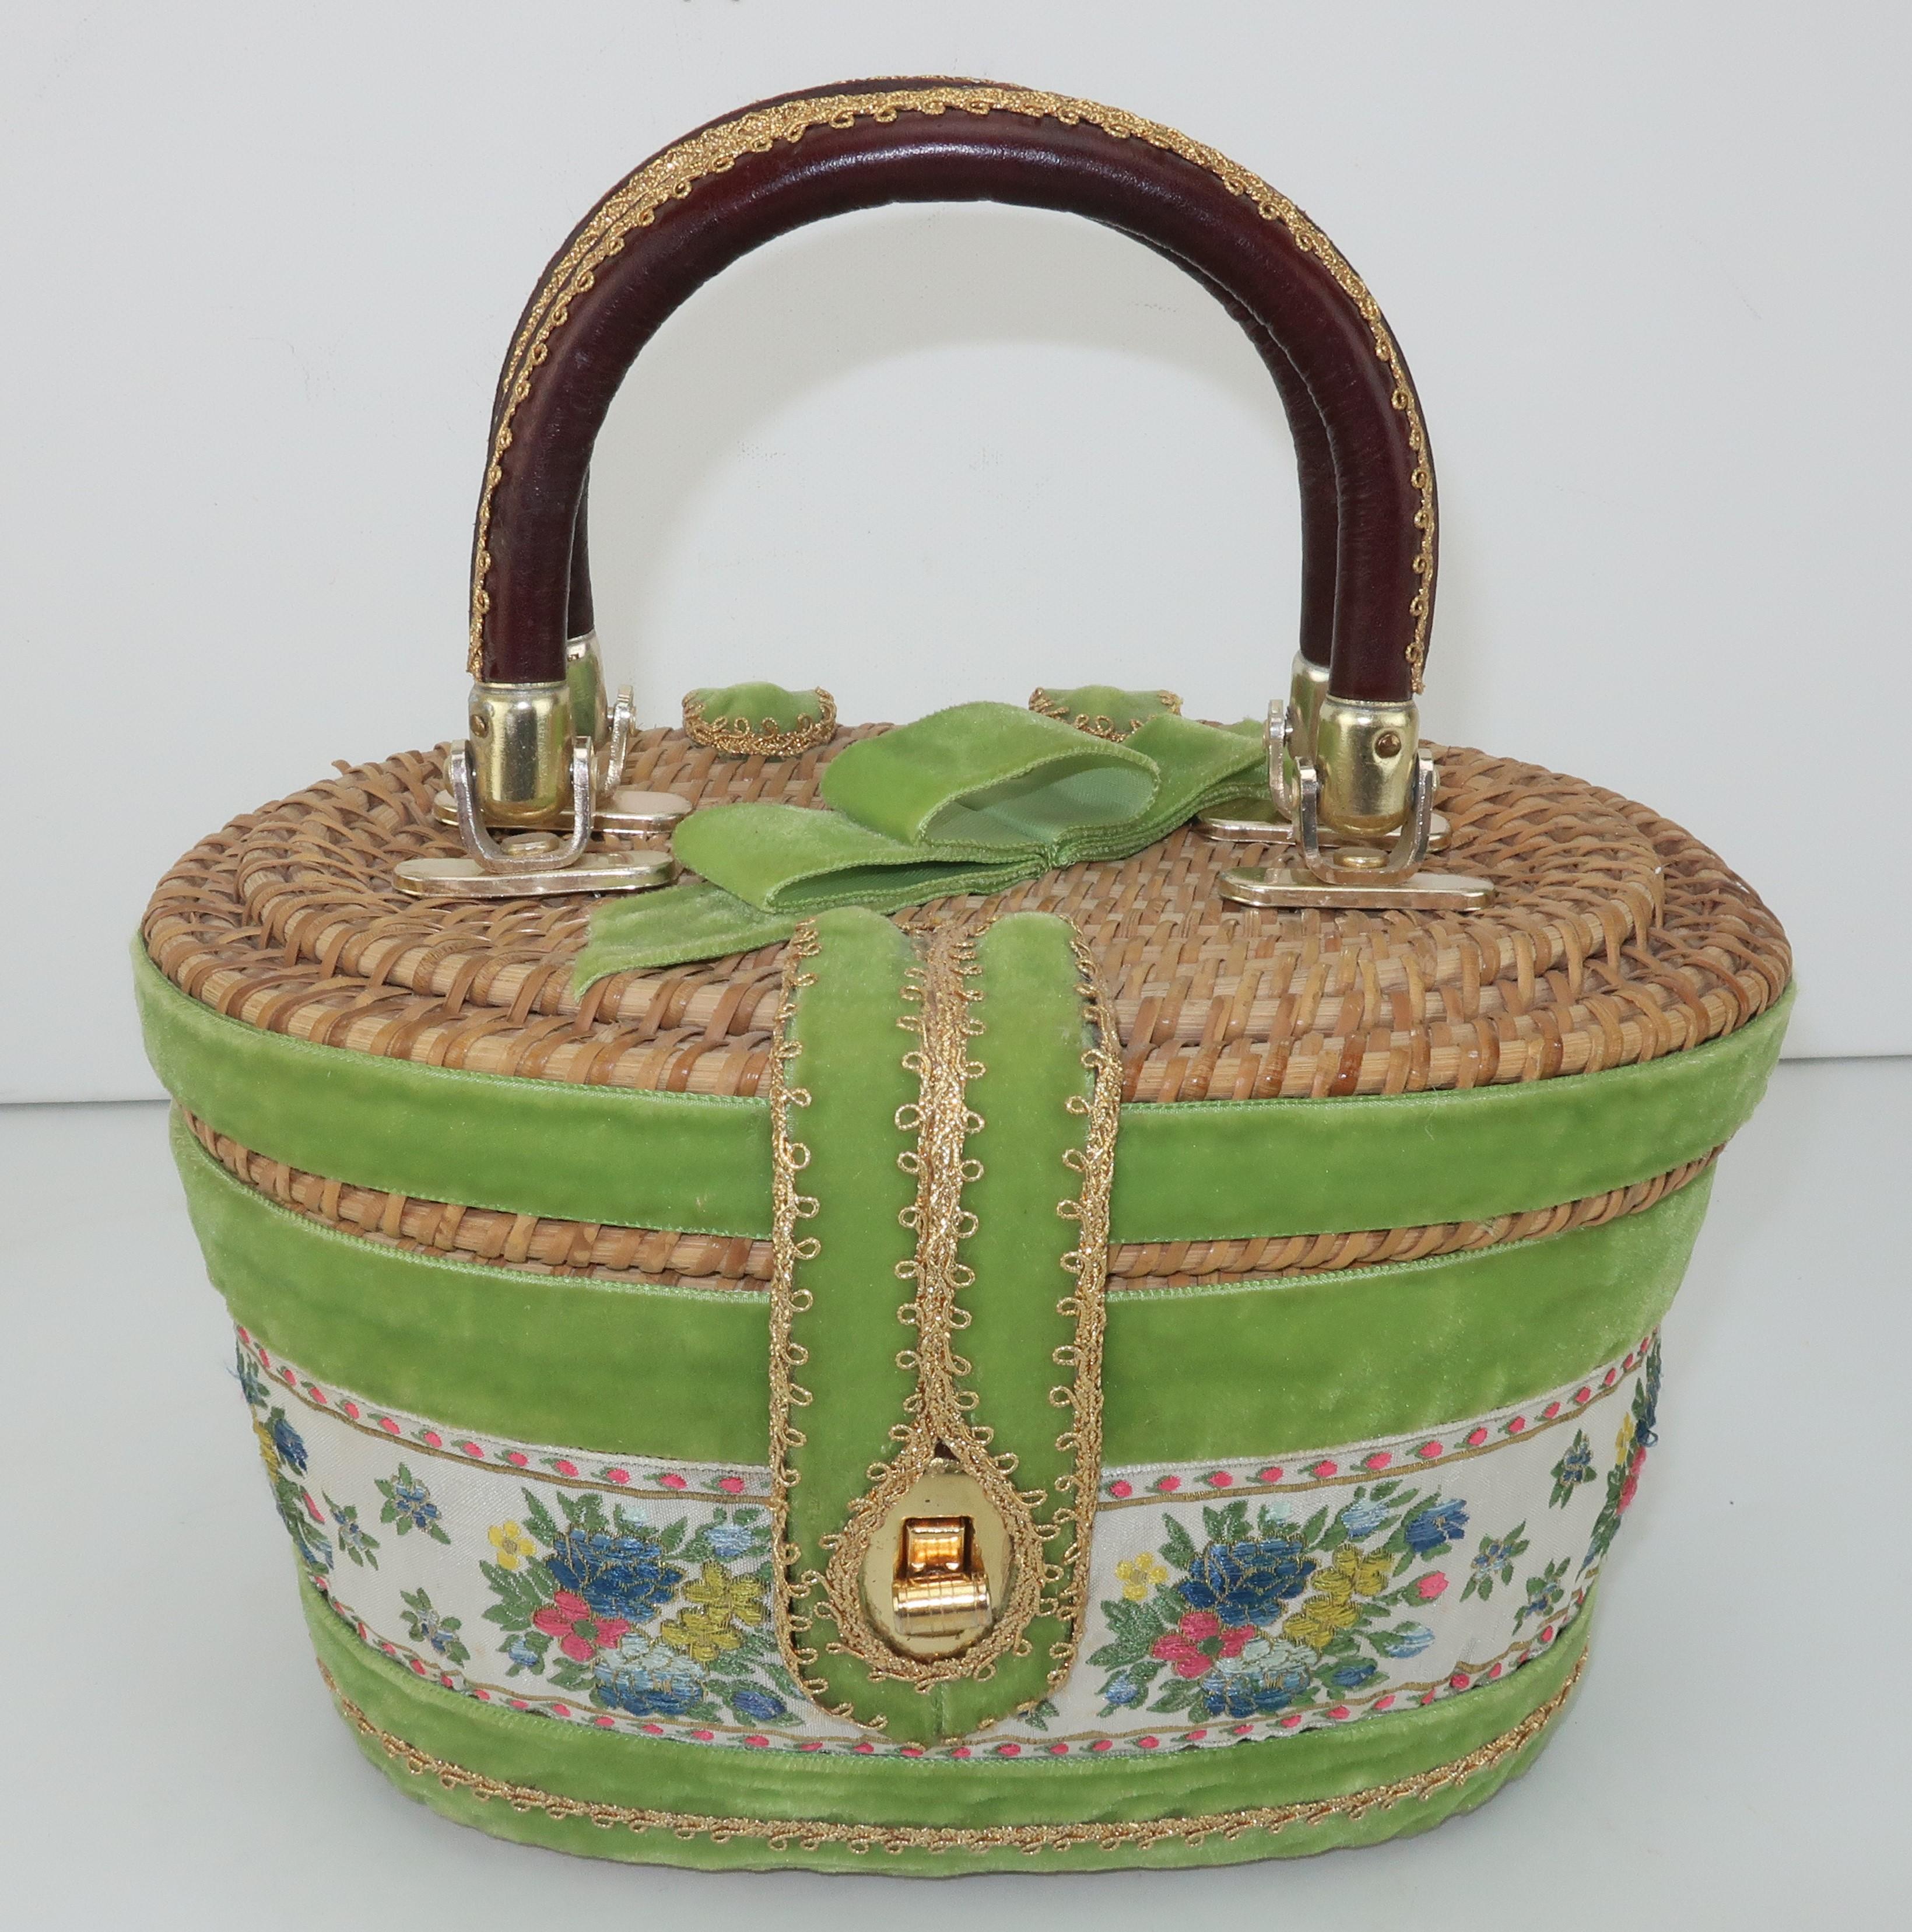 1960’s Billie Ross of the Palm Beaches wicker basket handbag with whimsical brocade and velvet ribbon embellishments incorporating shades of lime green, hot pink, yellow, gold and blue.  The bag has double leather covered top handles and a turn lock